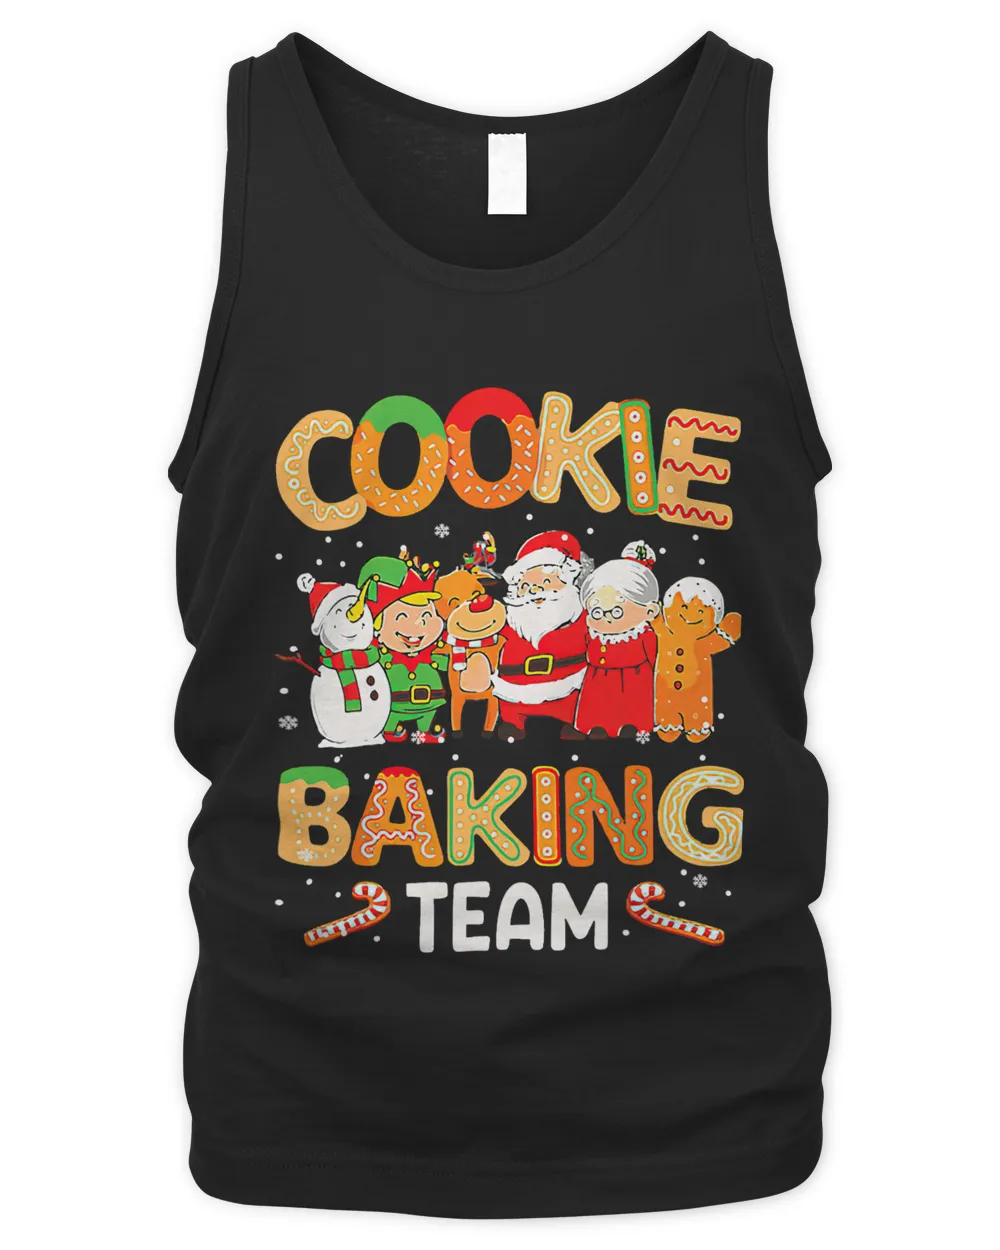 Cookie Baking Team Cute Gingerbread Family Christmas Holiday 406